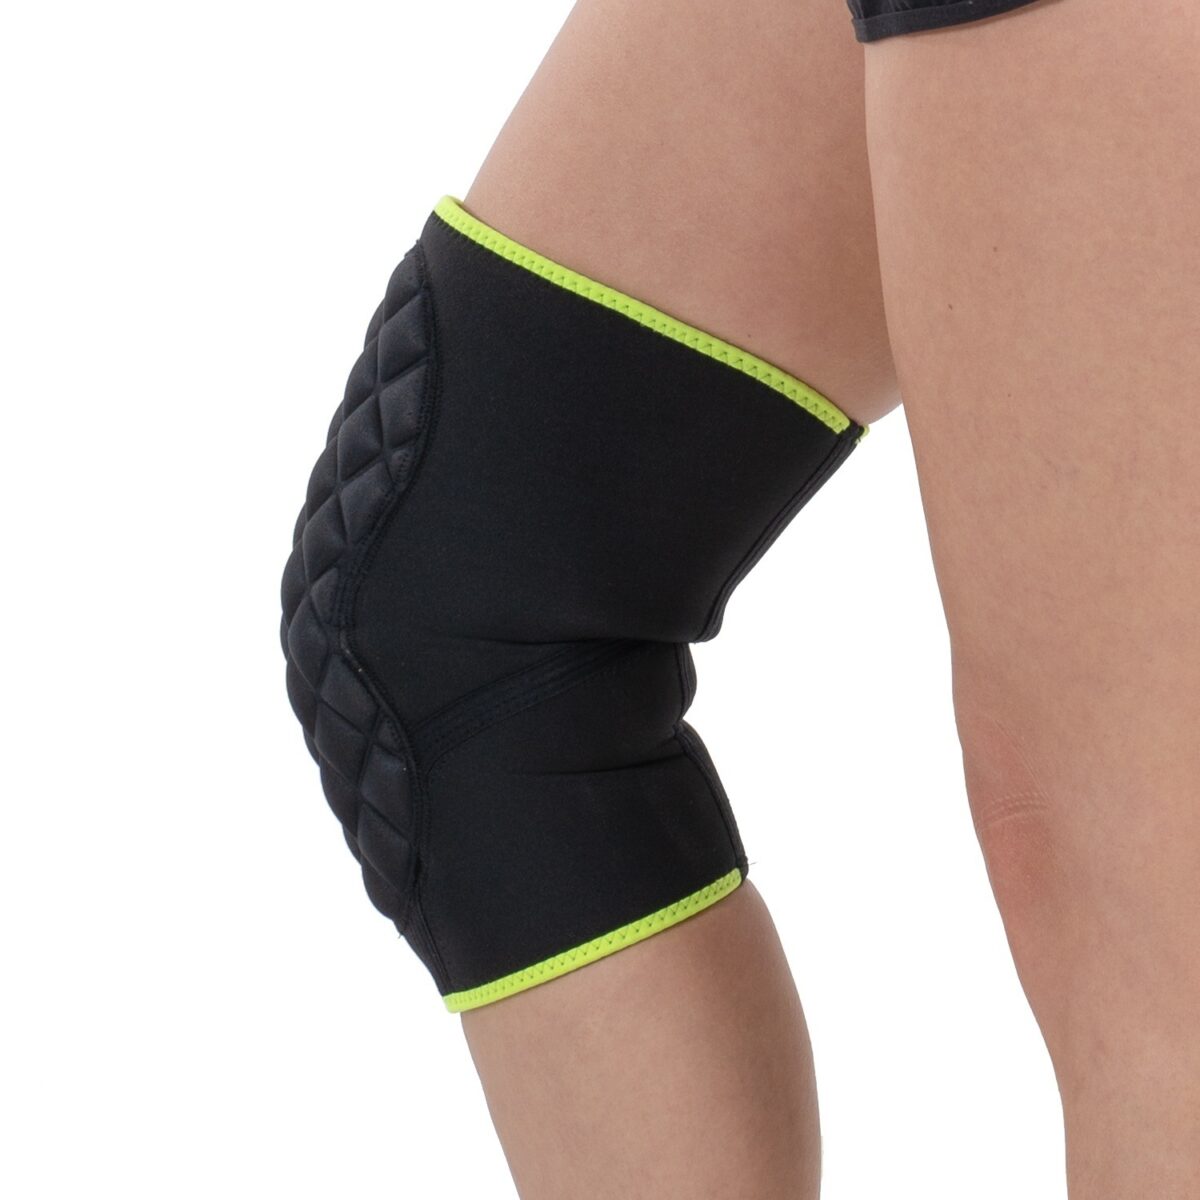 wingmed orthopedic equipments W512 sportive knee support with pad 37